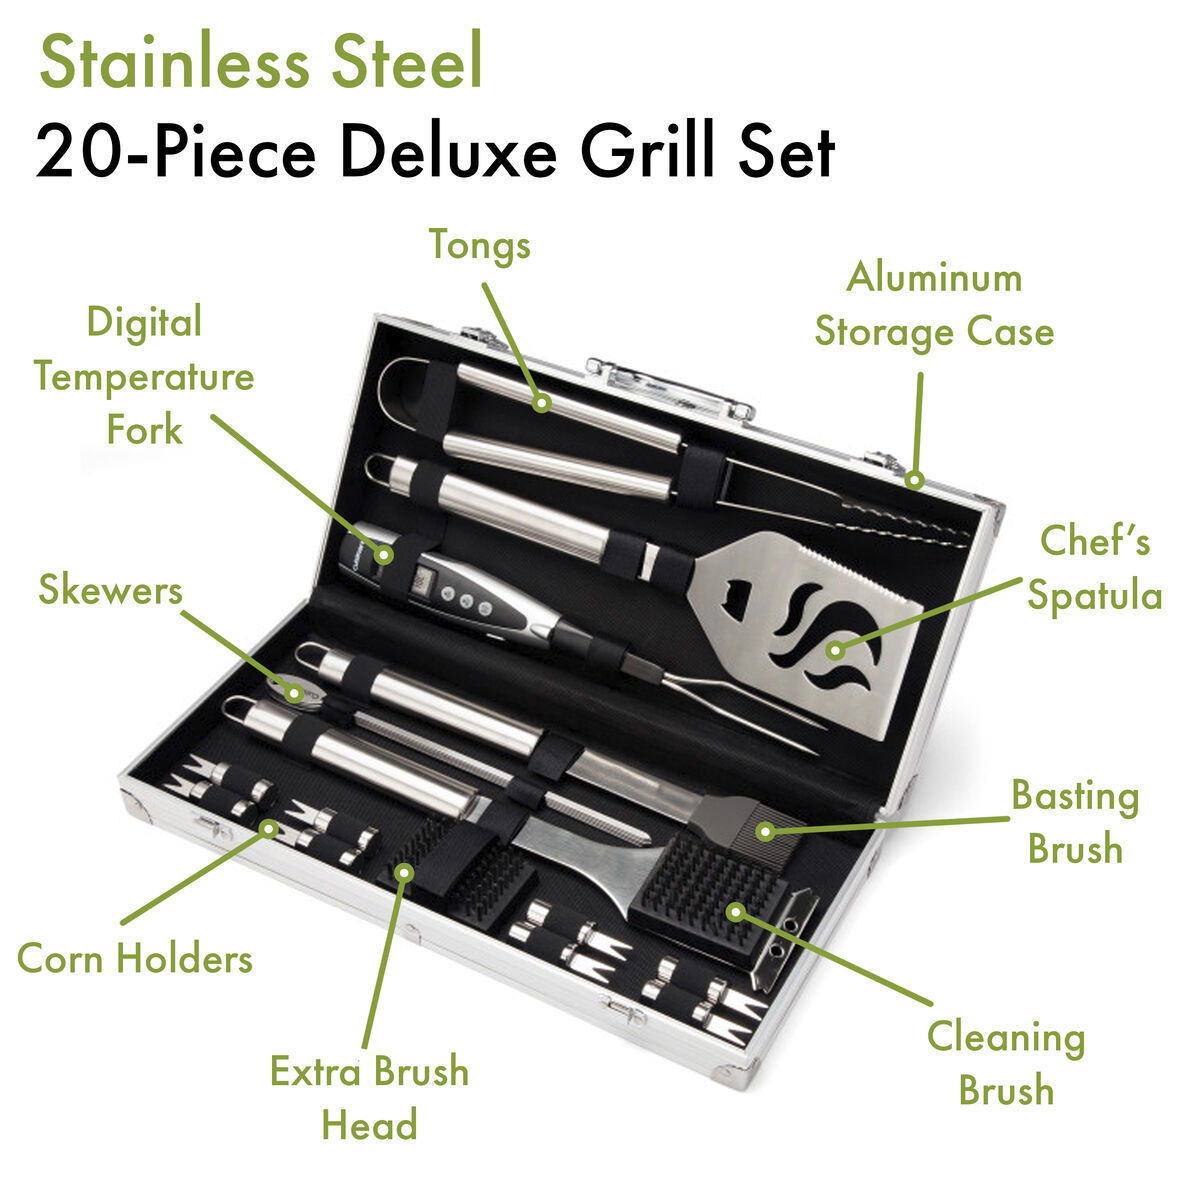 Deluxe Grill Set (20 Piece)